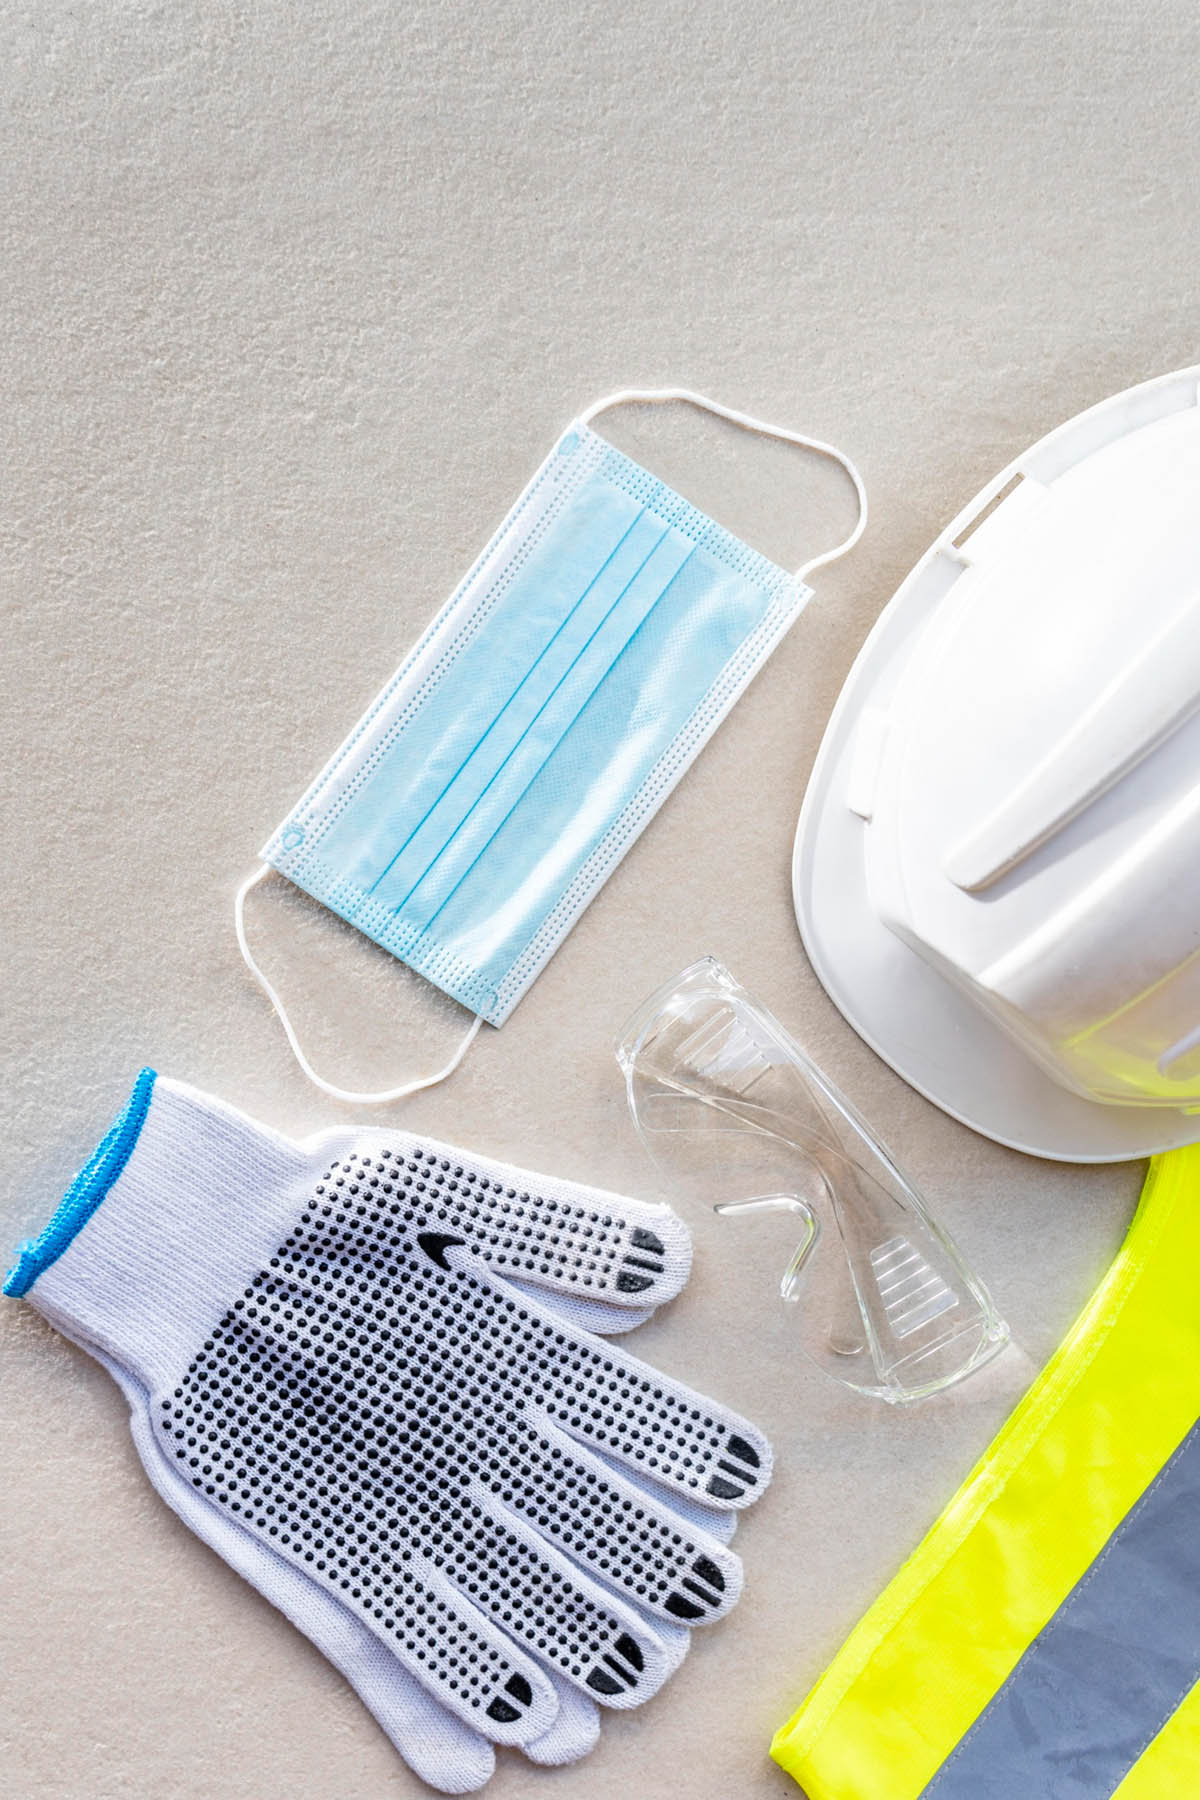 A selection of personal protective equipment also known as PPE